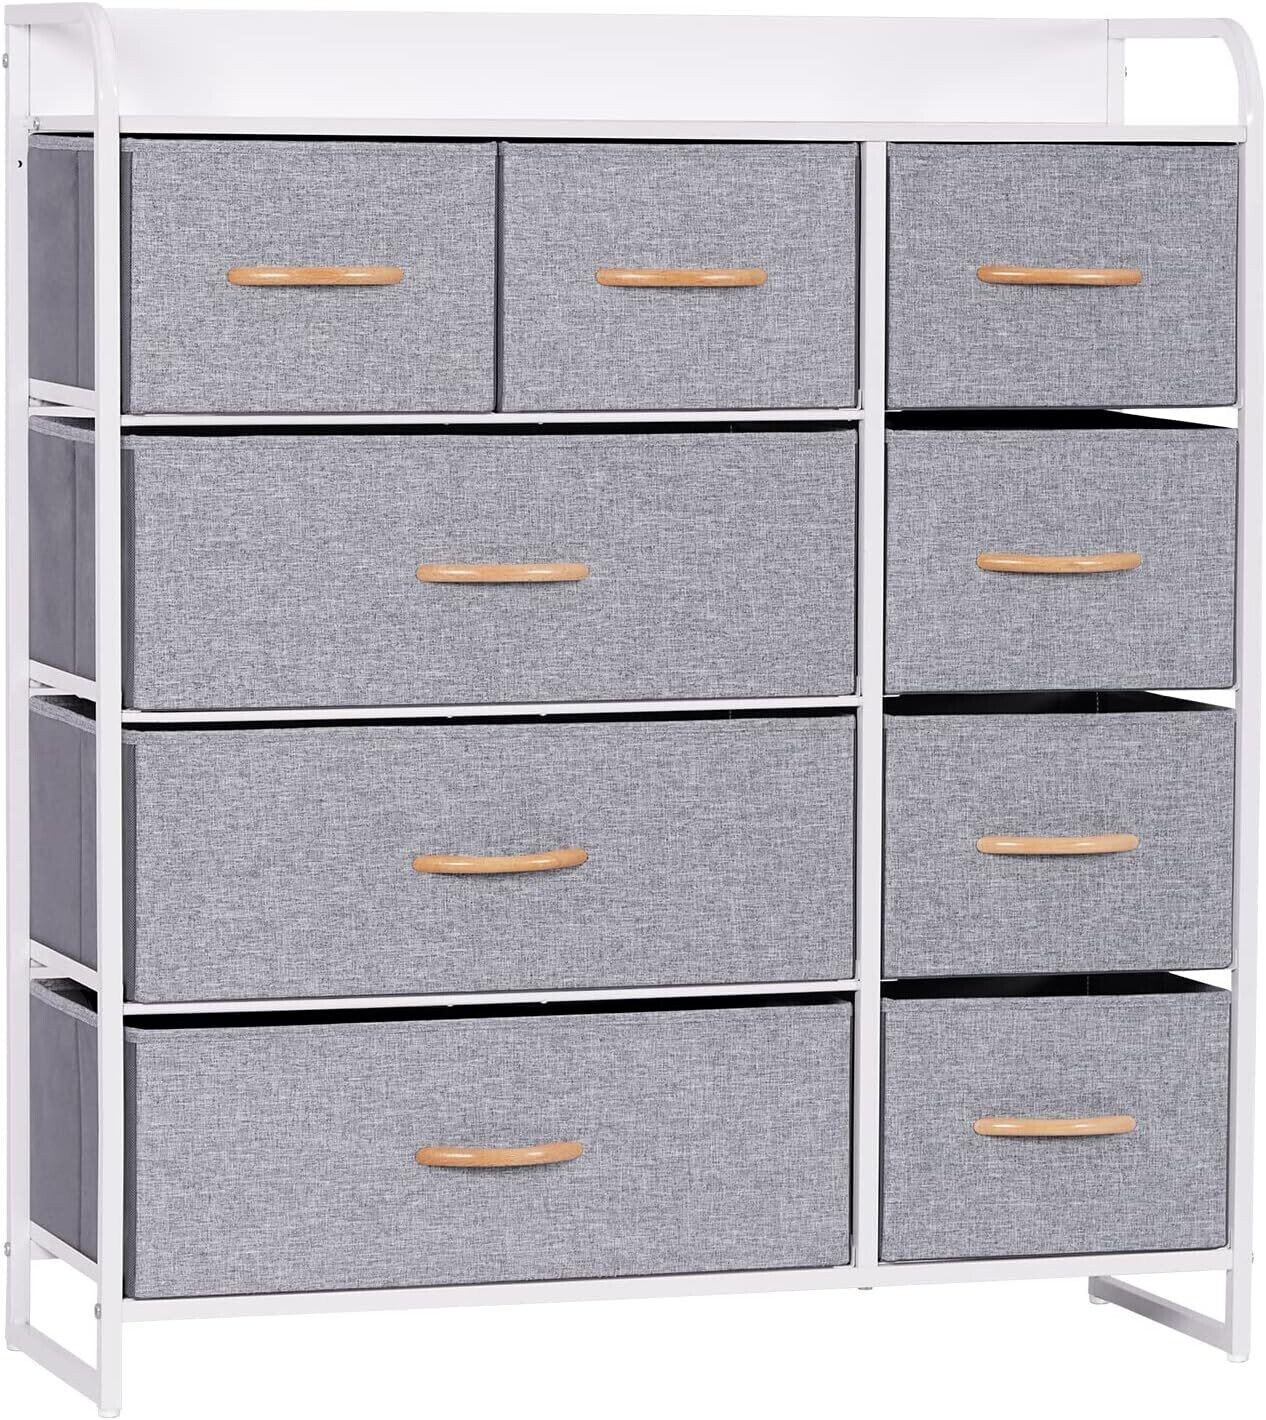 9-Drawer Storage Chest of Drawers Organizer Unit for Bedroom Living Room Closet, Sturdy Steel Frame, Easy Pull Fabric Bins & Wooden Top, Fabric Dresser